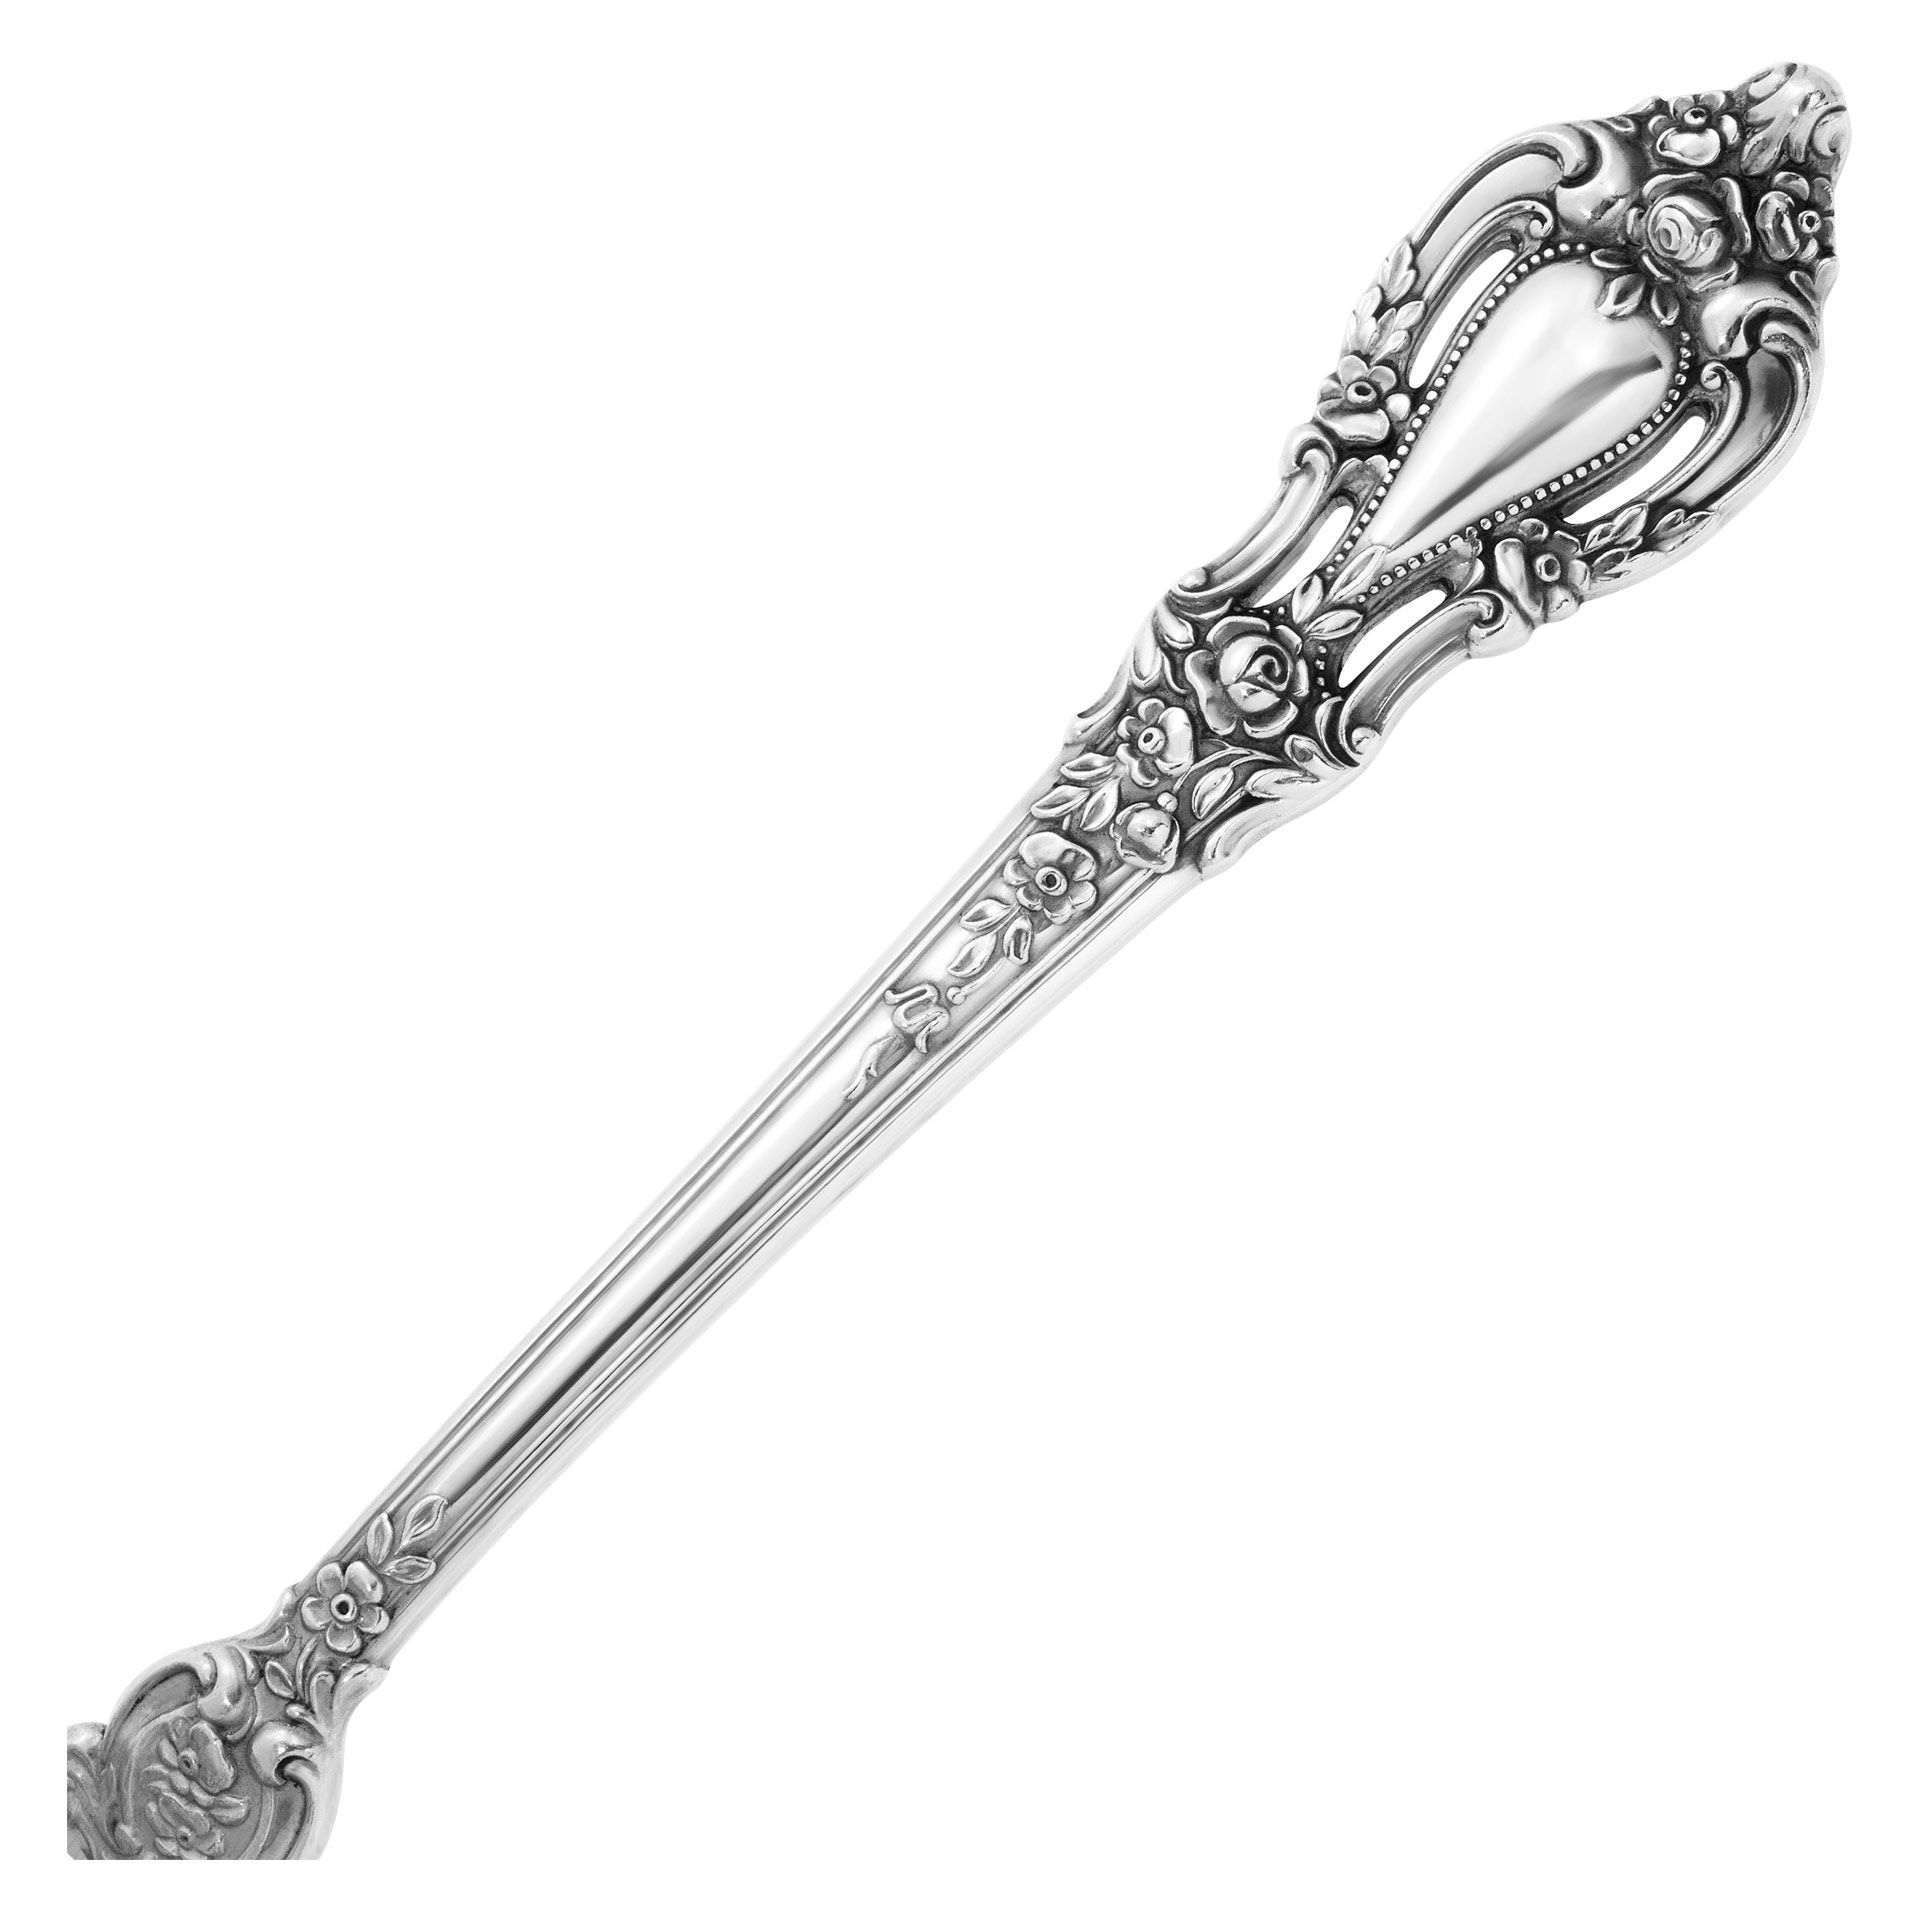 Tudor by Lunt Sterling Silver Gumbo Soup Spoon 7